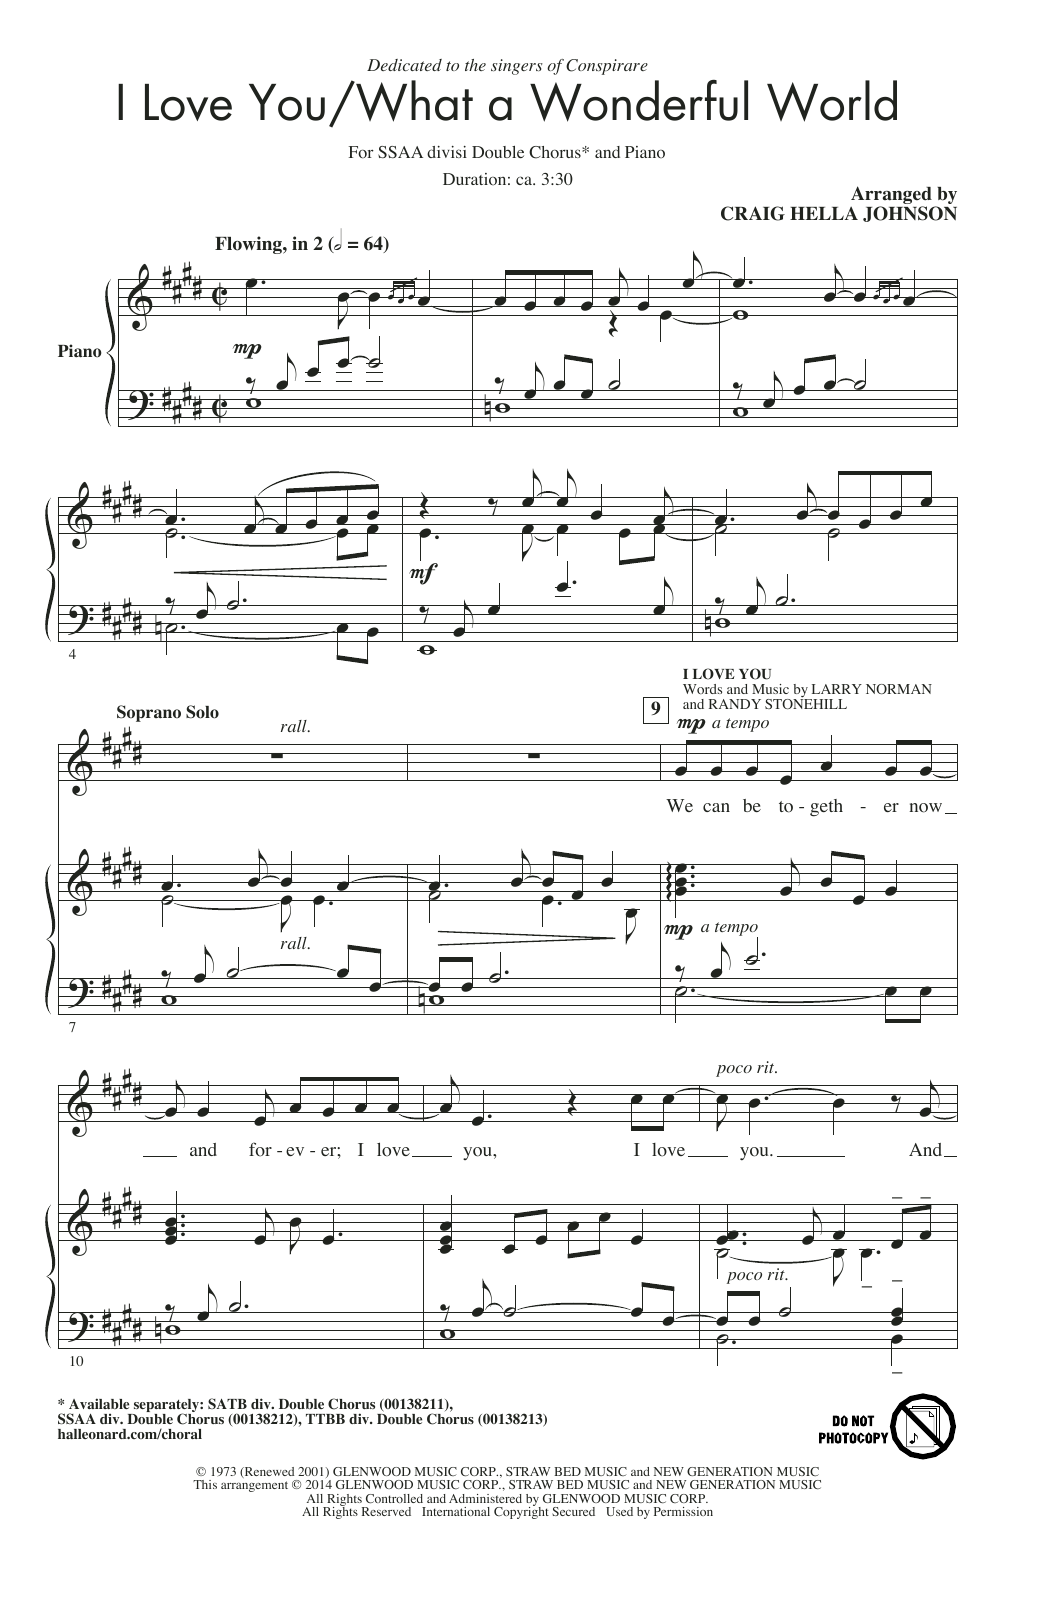 Download Conspirare I Love You / What A Wonderful World (ar Sheet Music